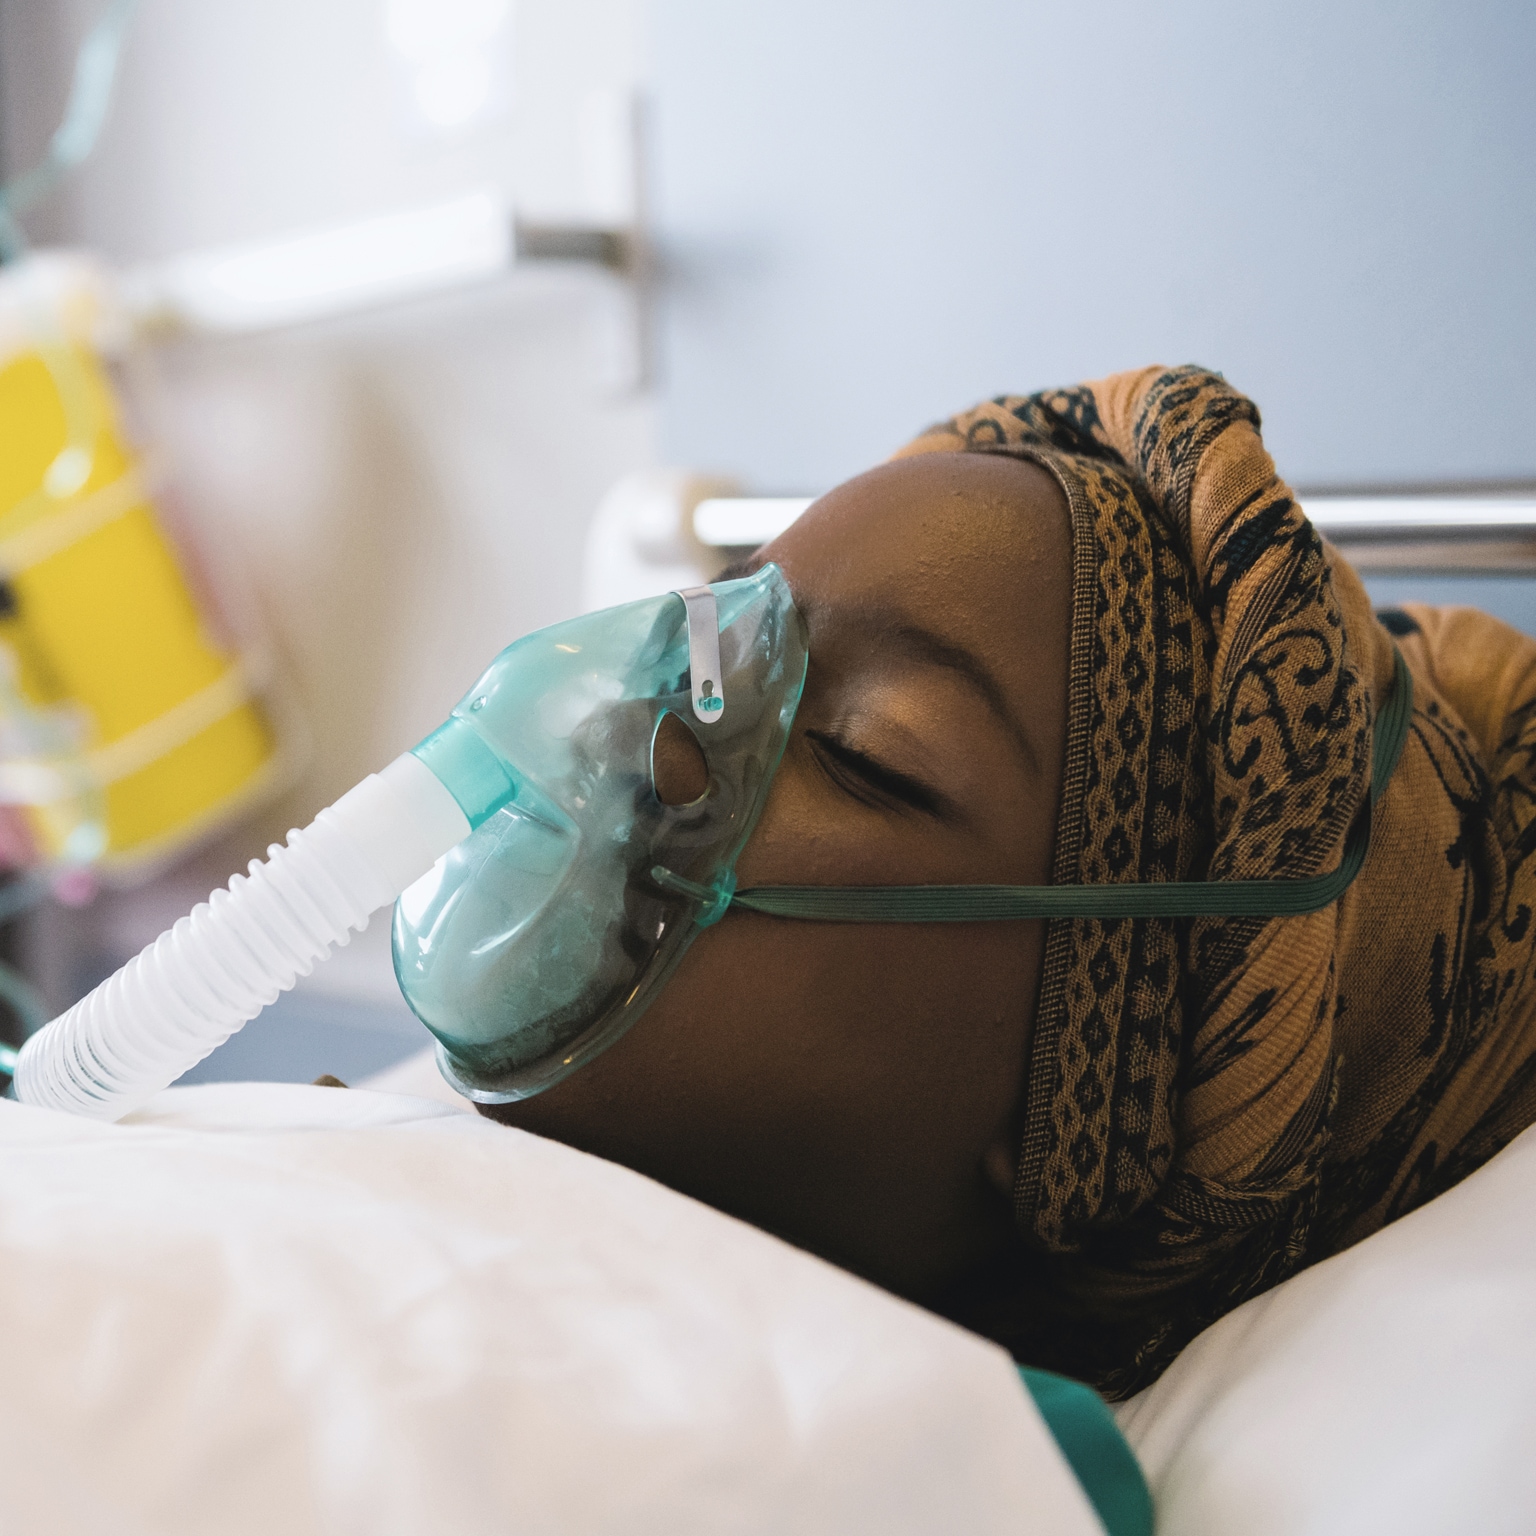 Medical oxygen: COVID-19 exposes a critical shortage in developing ...